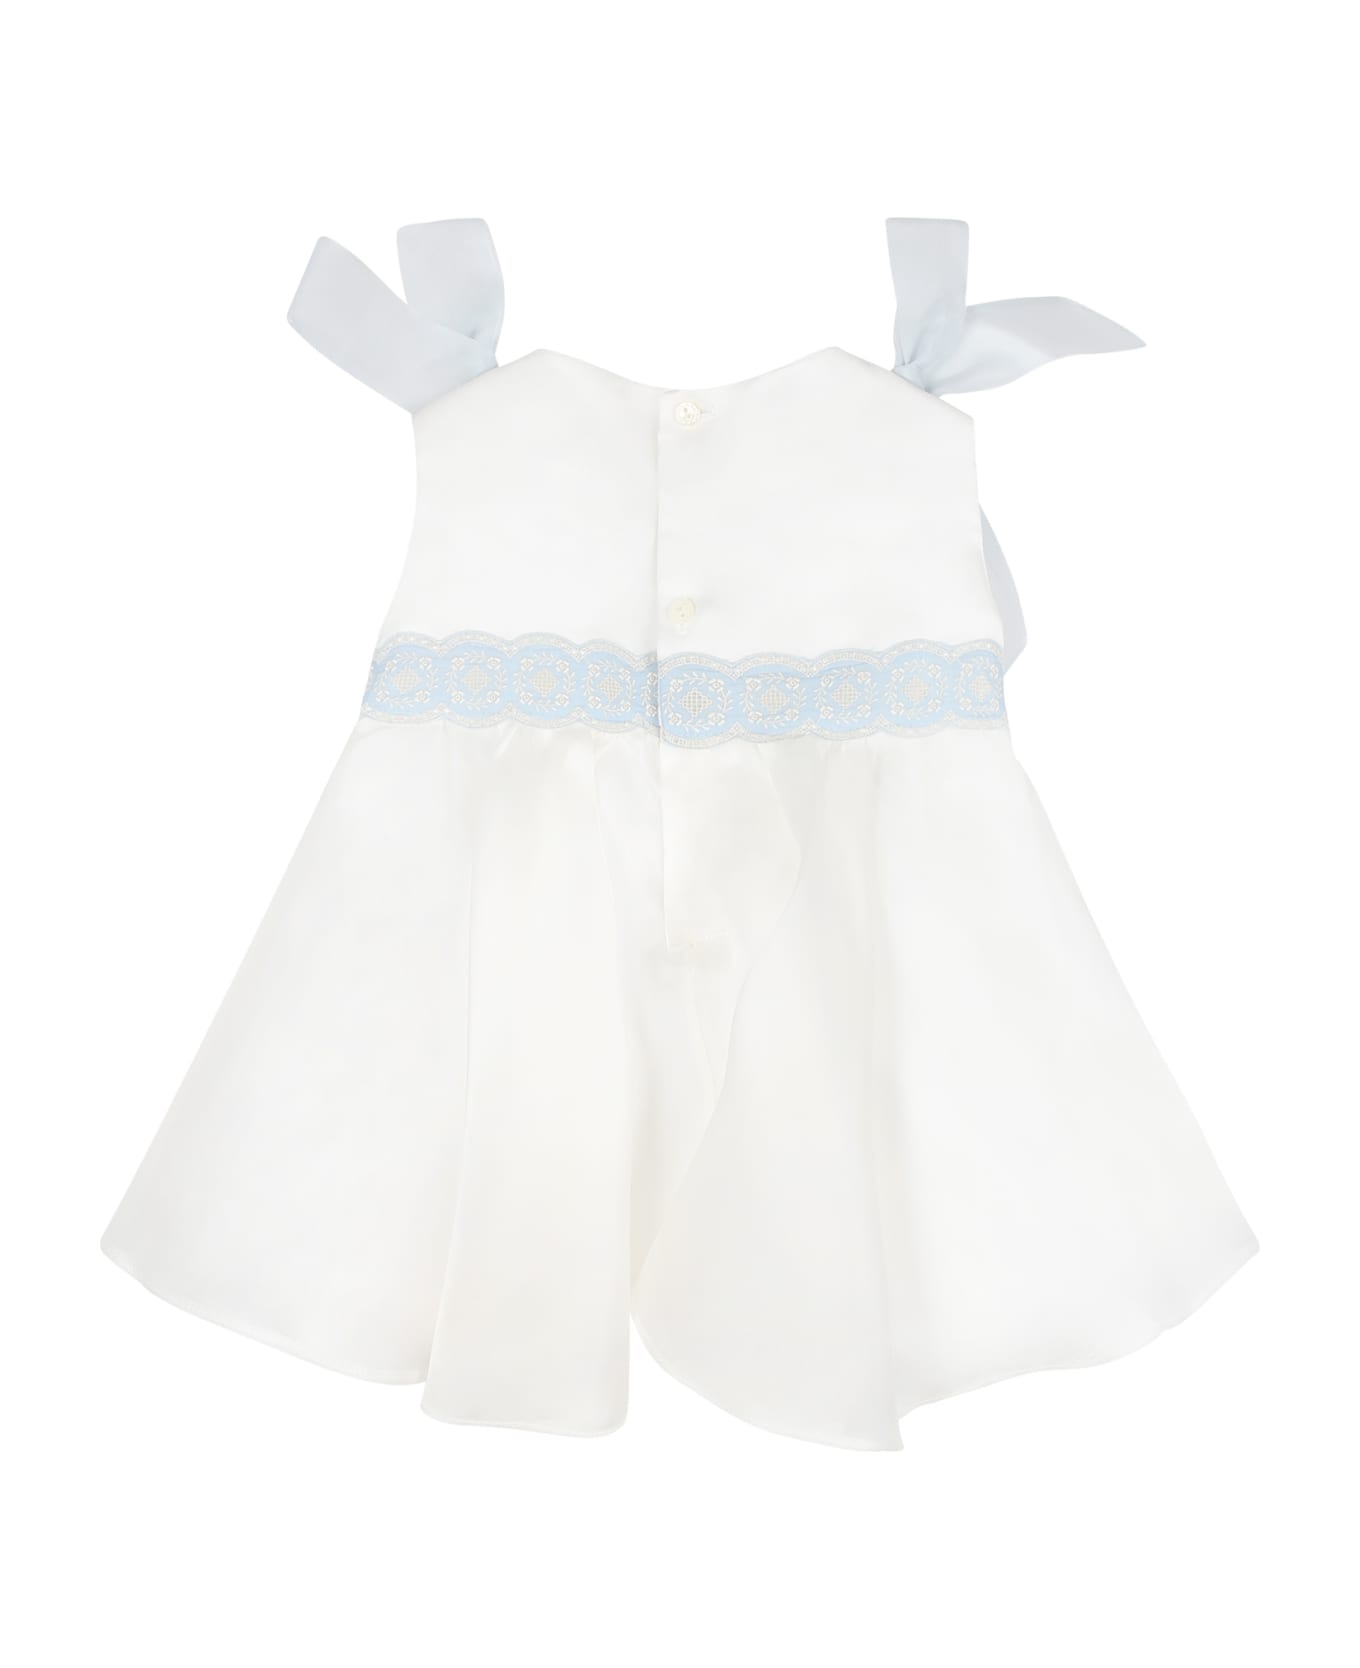 La stupenderia White Dress For Baby Girl With Light Blue Embroidery - White ウェア